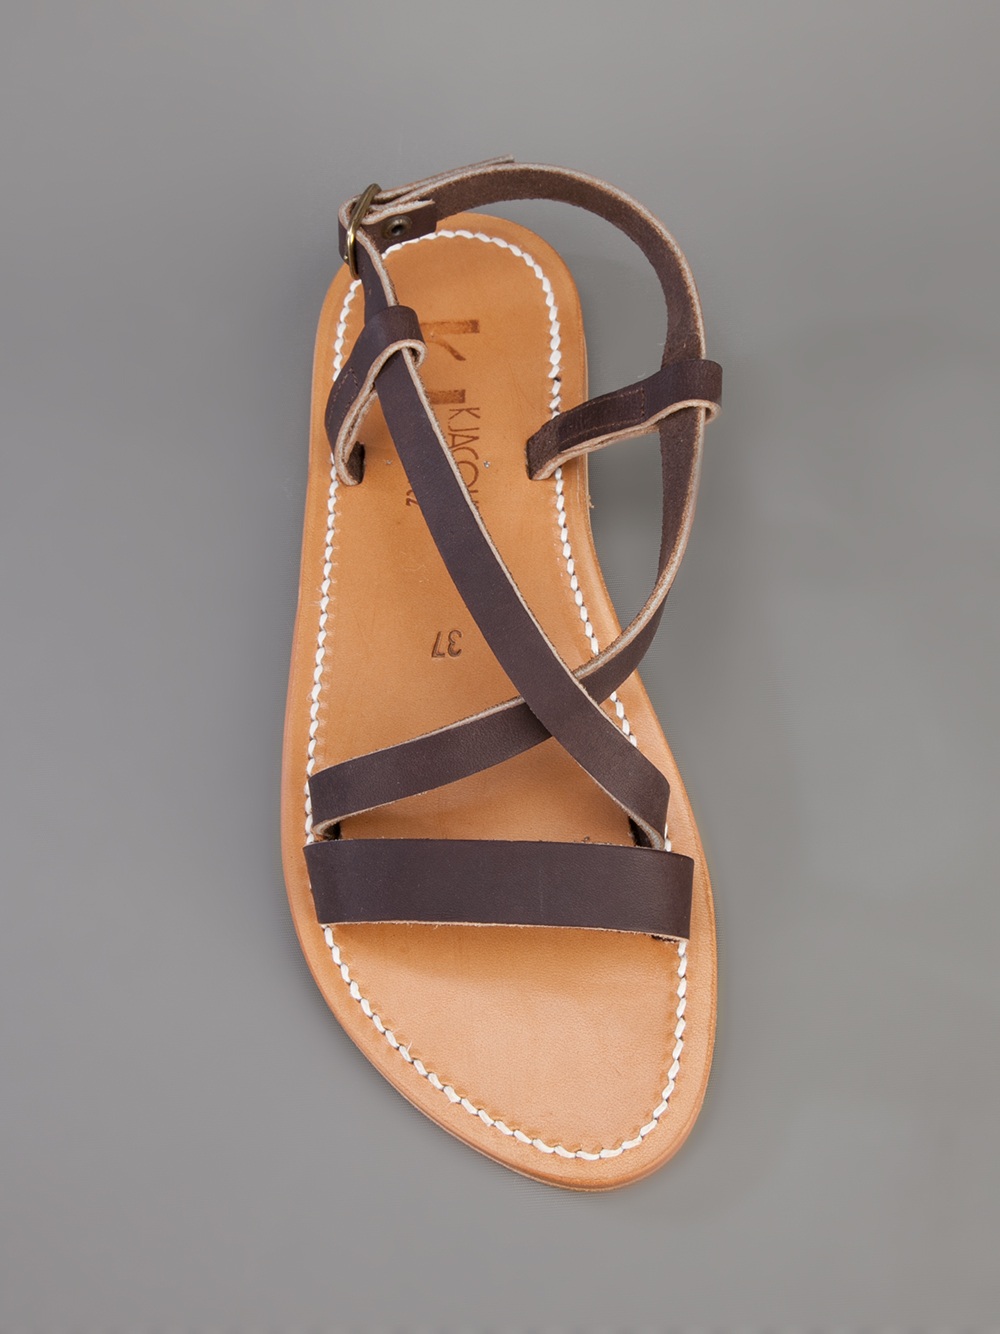 Lyst - K. Jacques Flavia Sandal in Brown